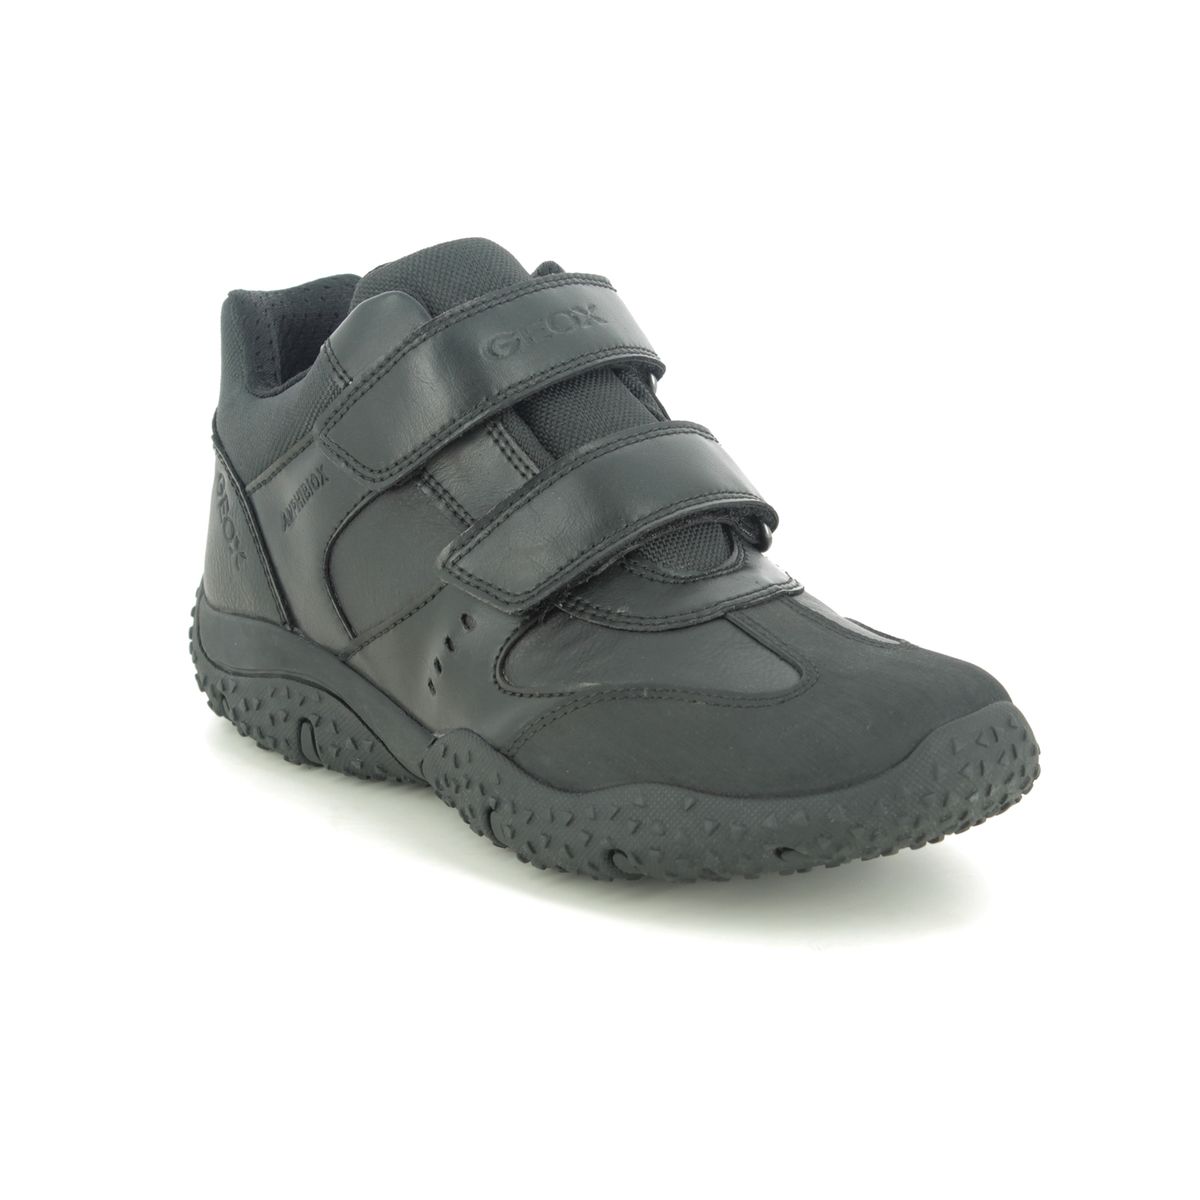 Geox - Baltic Boy Tex (Black Leather) J0442A-C9999 In Size 30 In Plain Black Leather For School For kids